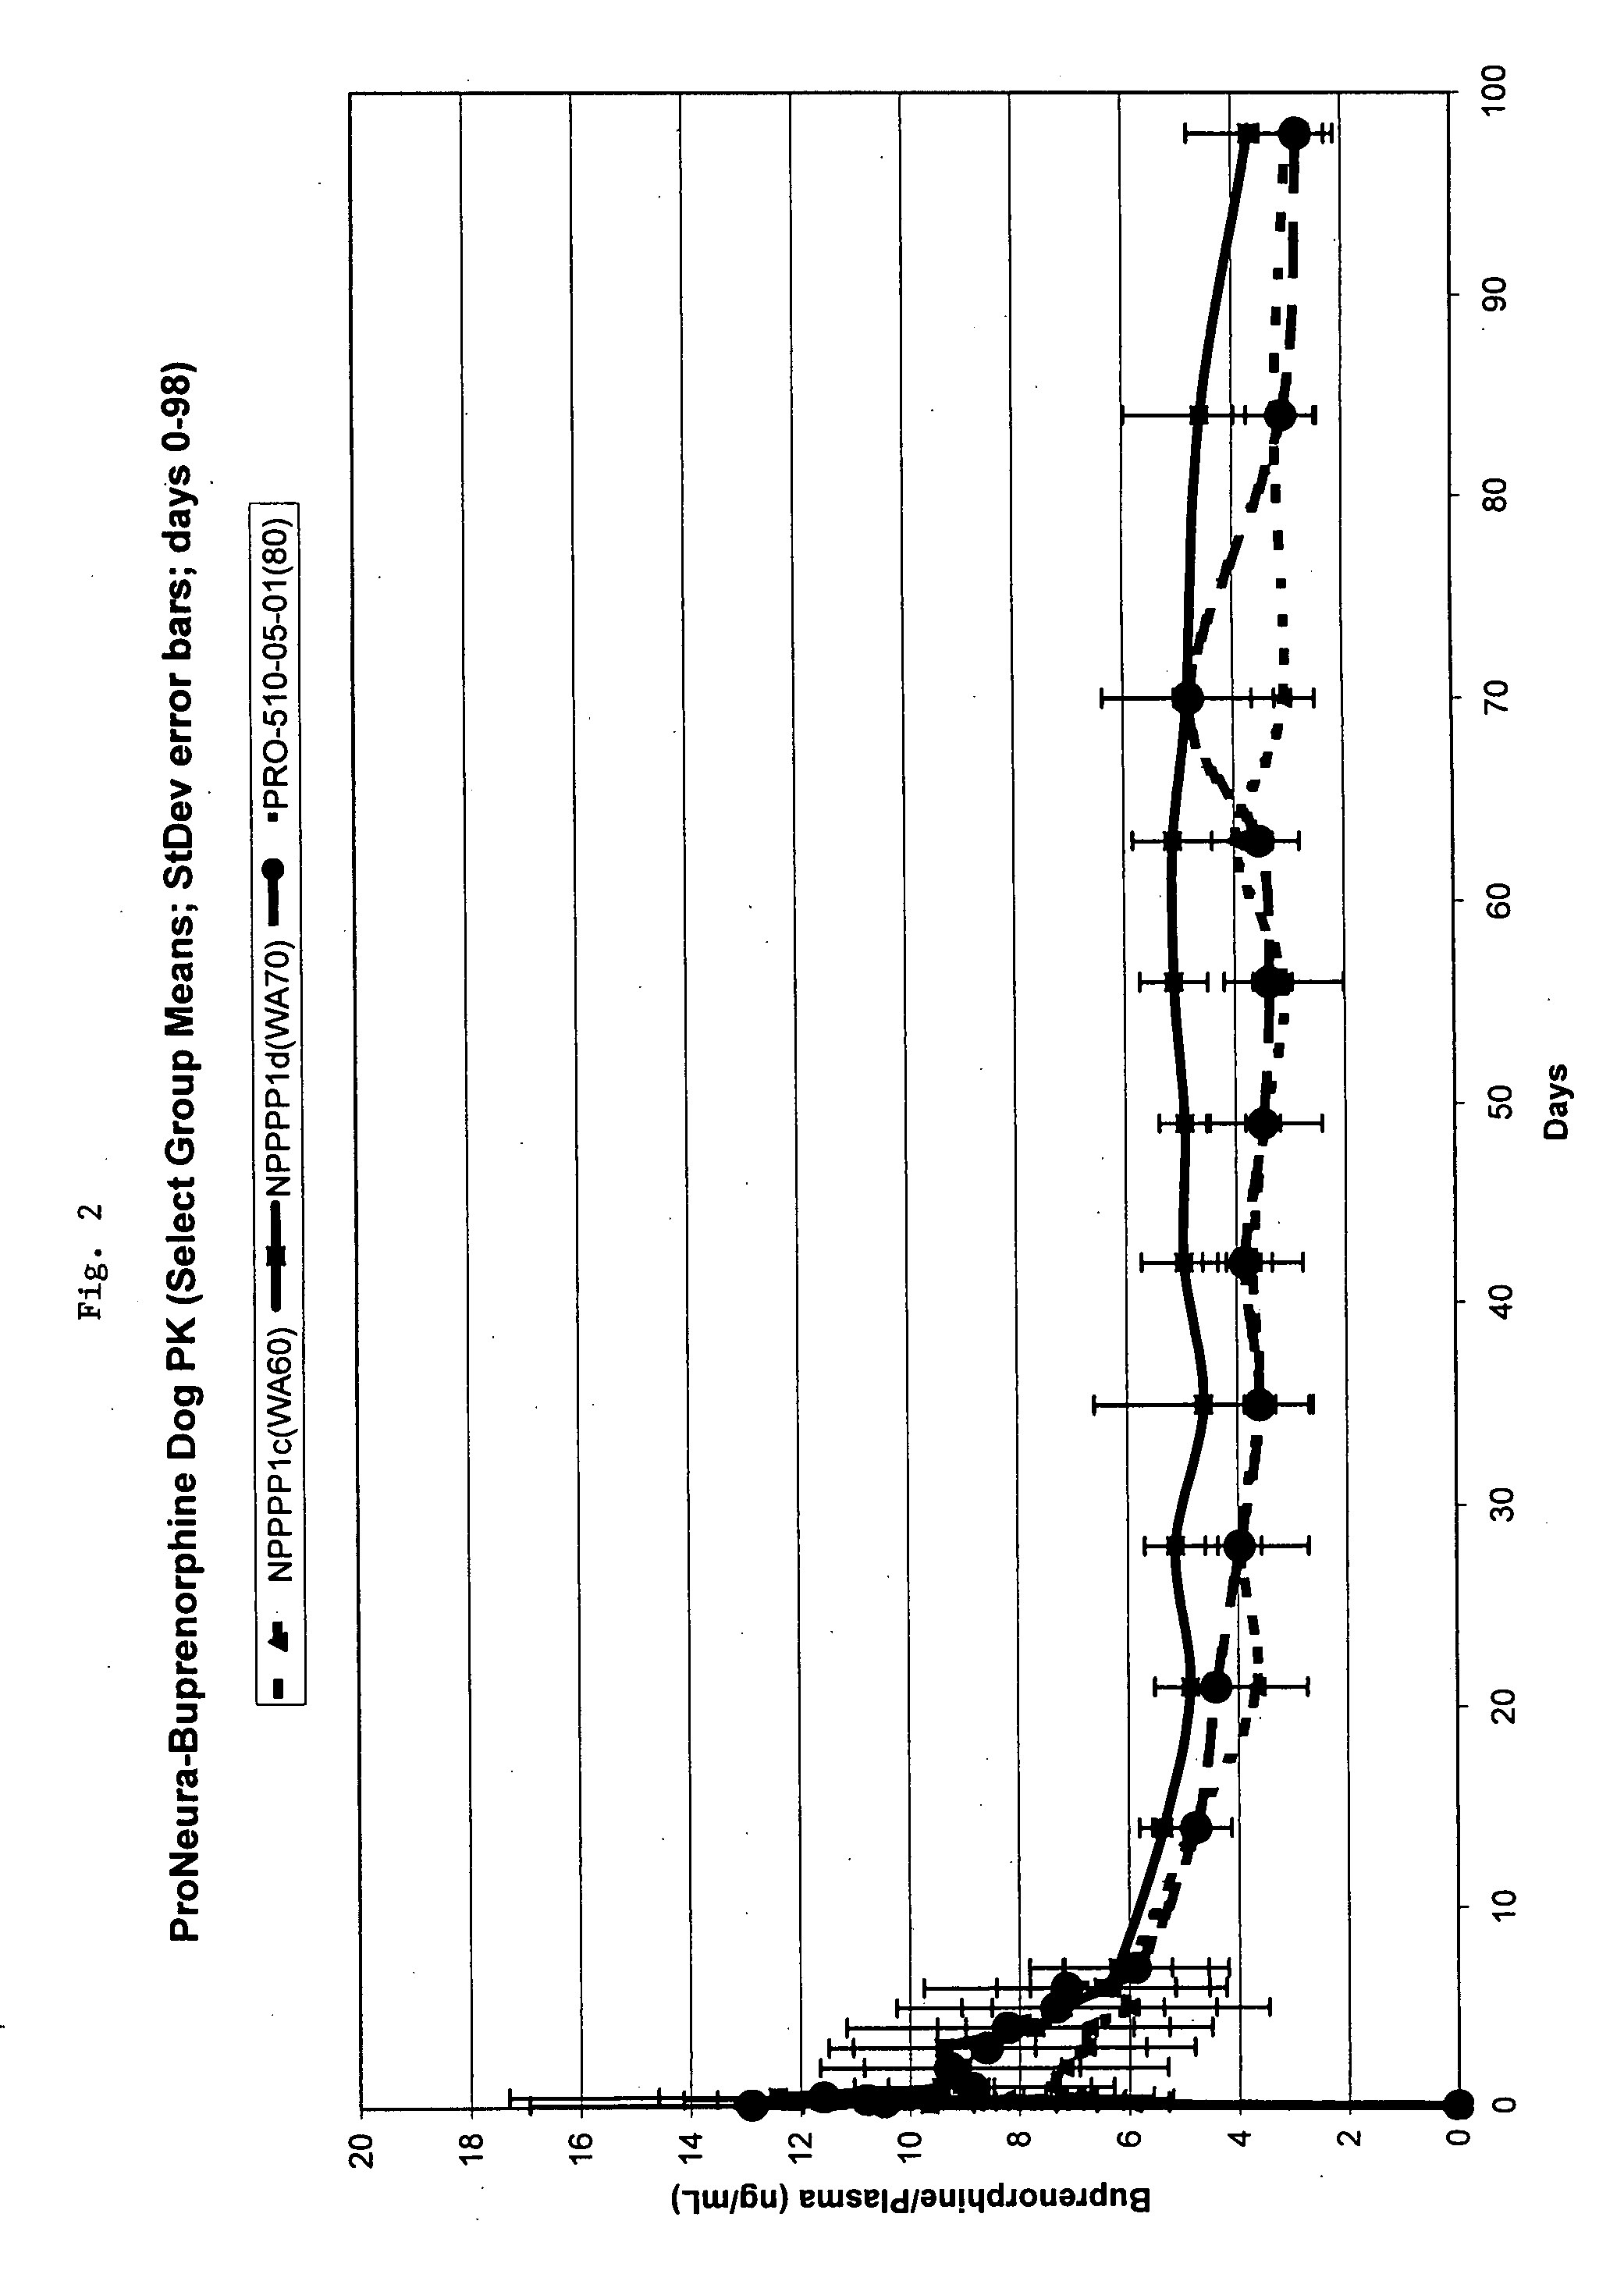 Implantable polymeric device for sustained release of buprenorphine with minimal initial burst